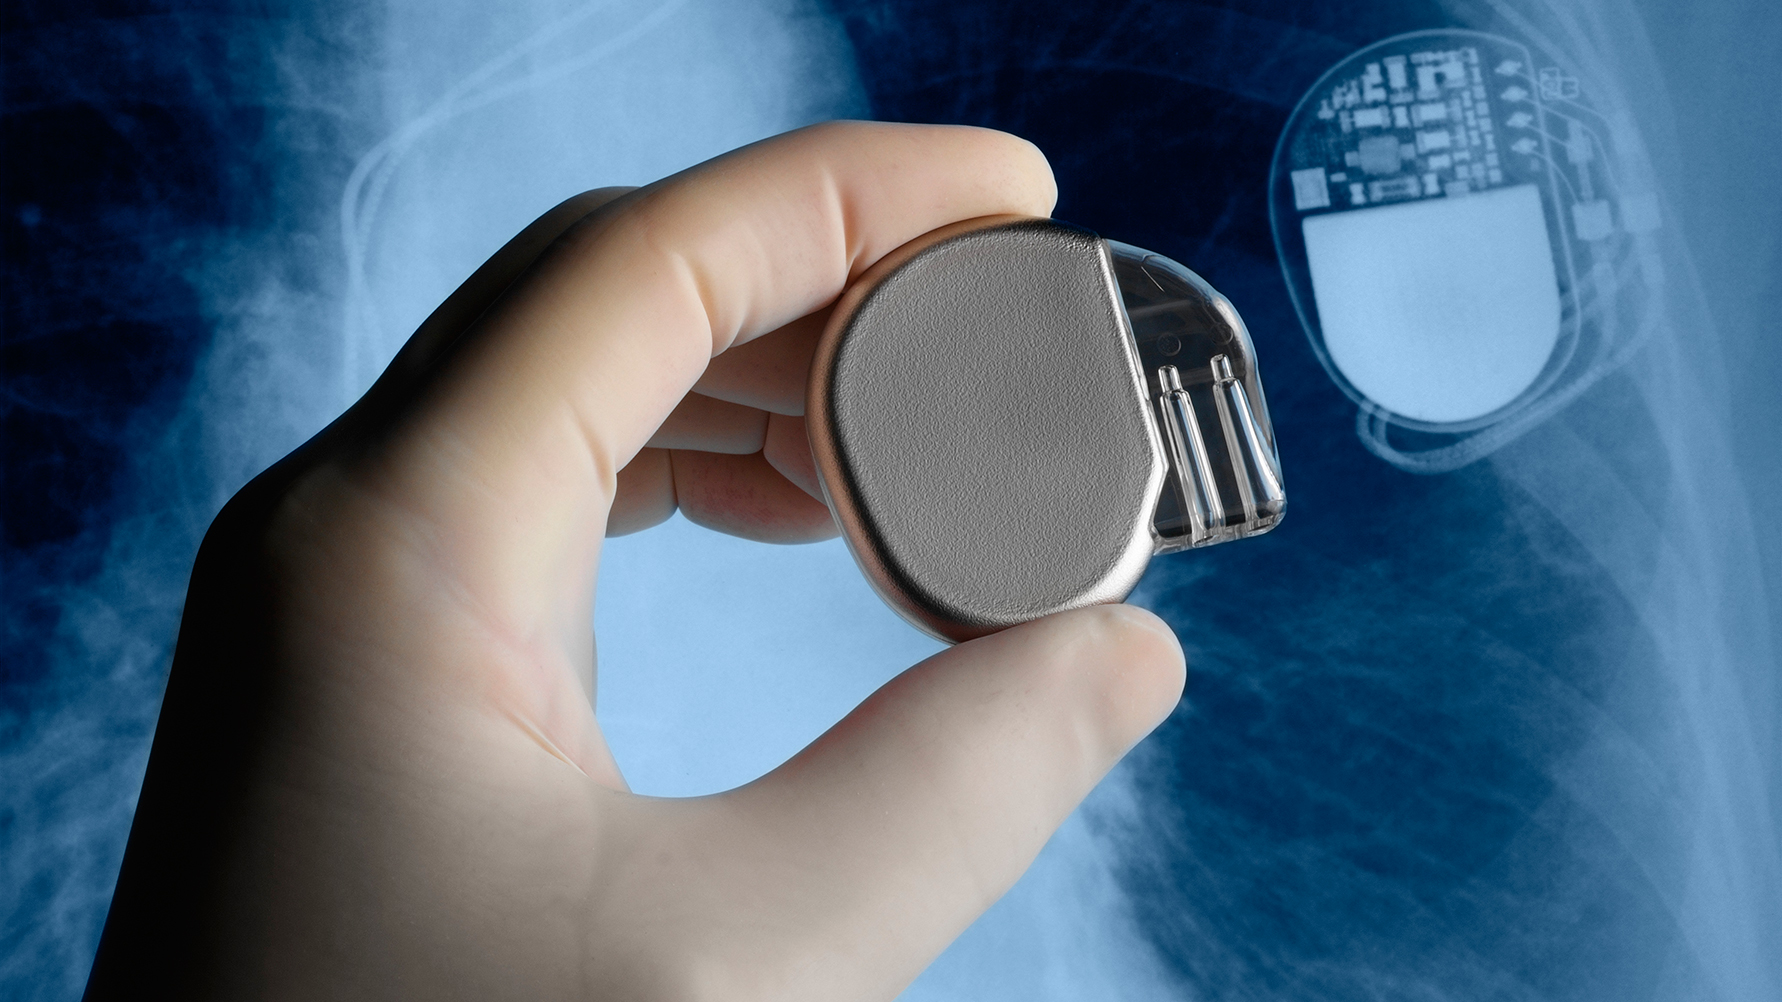 Global Implantable Medical Devices Market Research Report 2017- Johnson & Johnson Medtronic Danaher Corporation